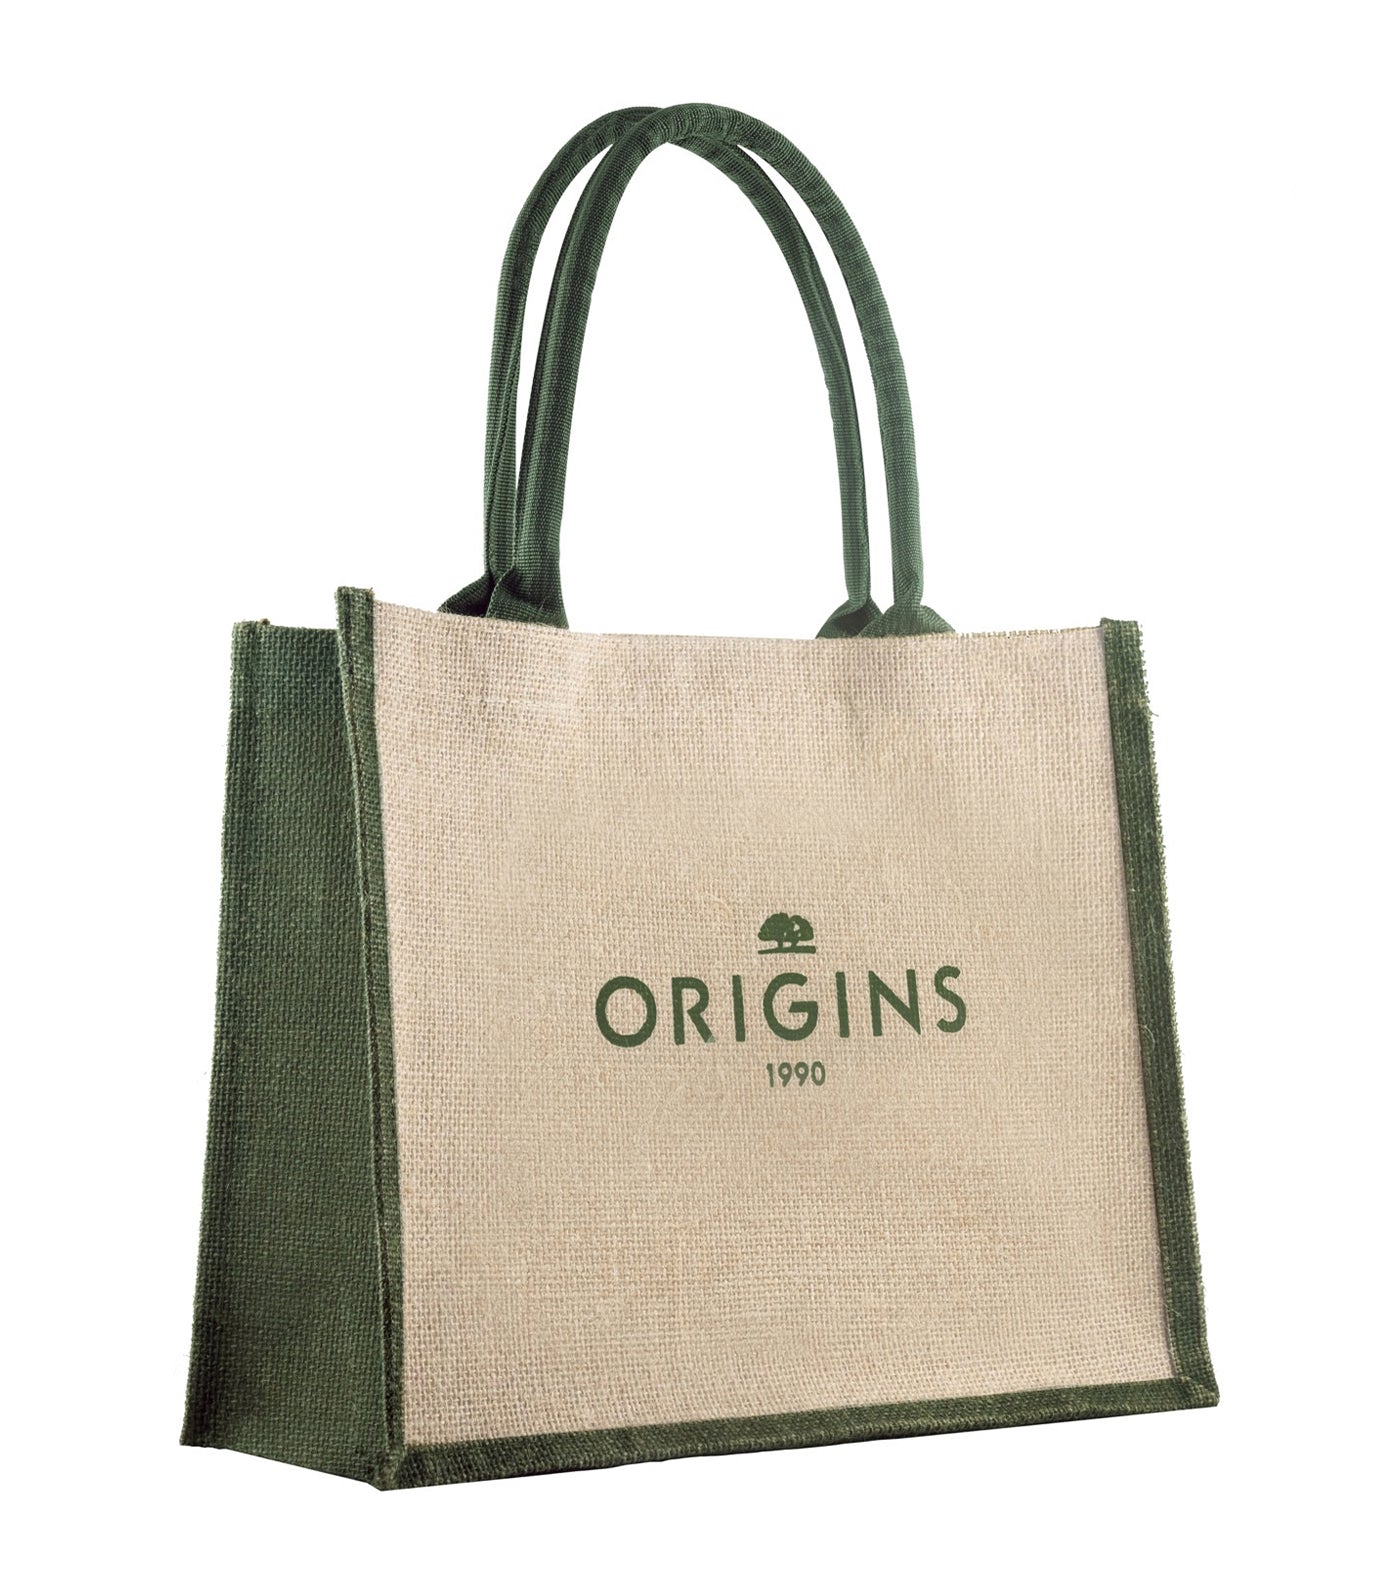 Complimentary Linen Tote Bag